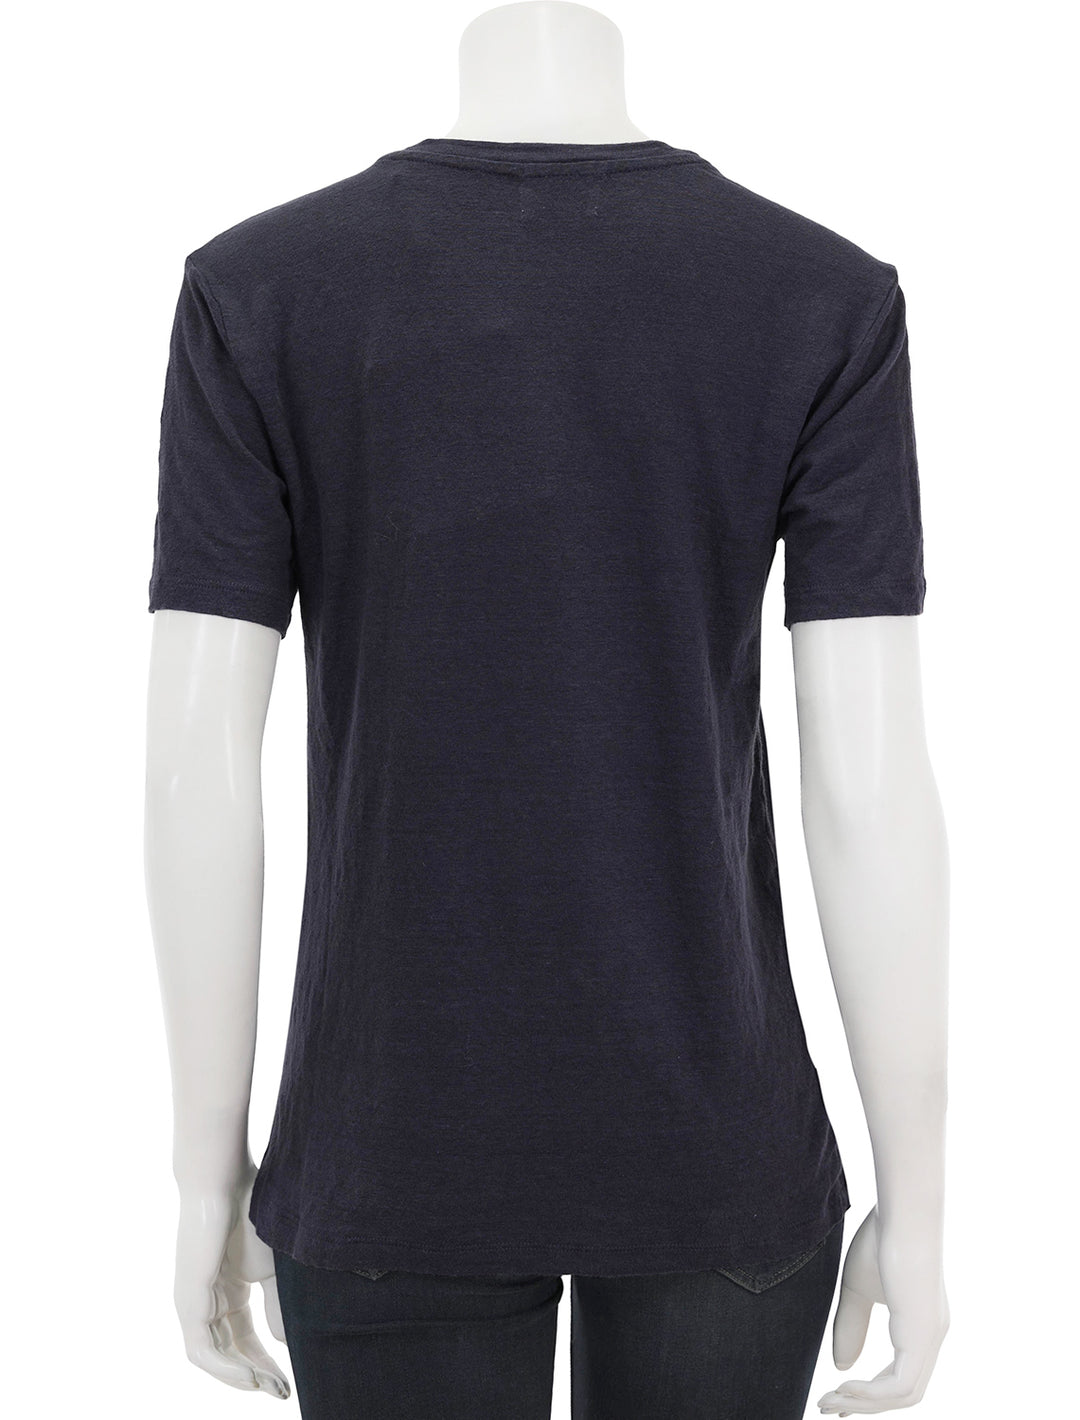 Back view of Isabel Marant Etoile's zewel tee in faded night and gold.